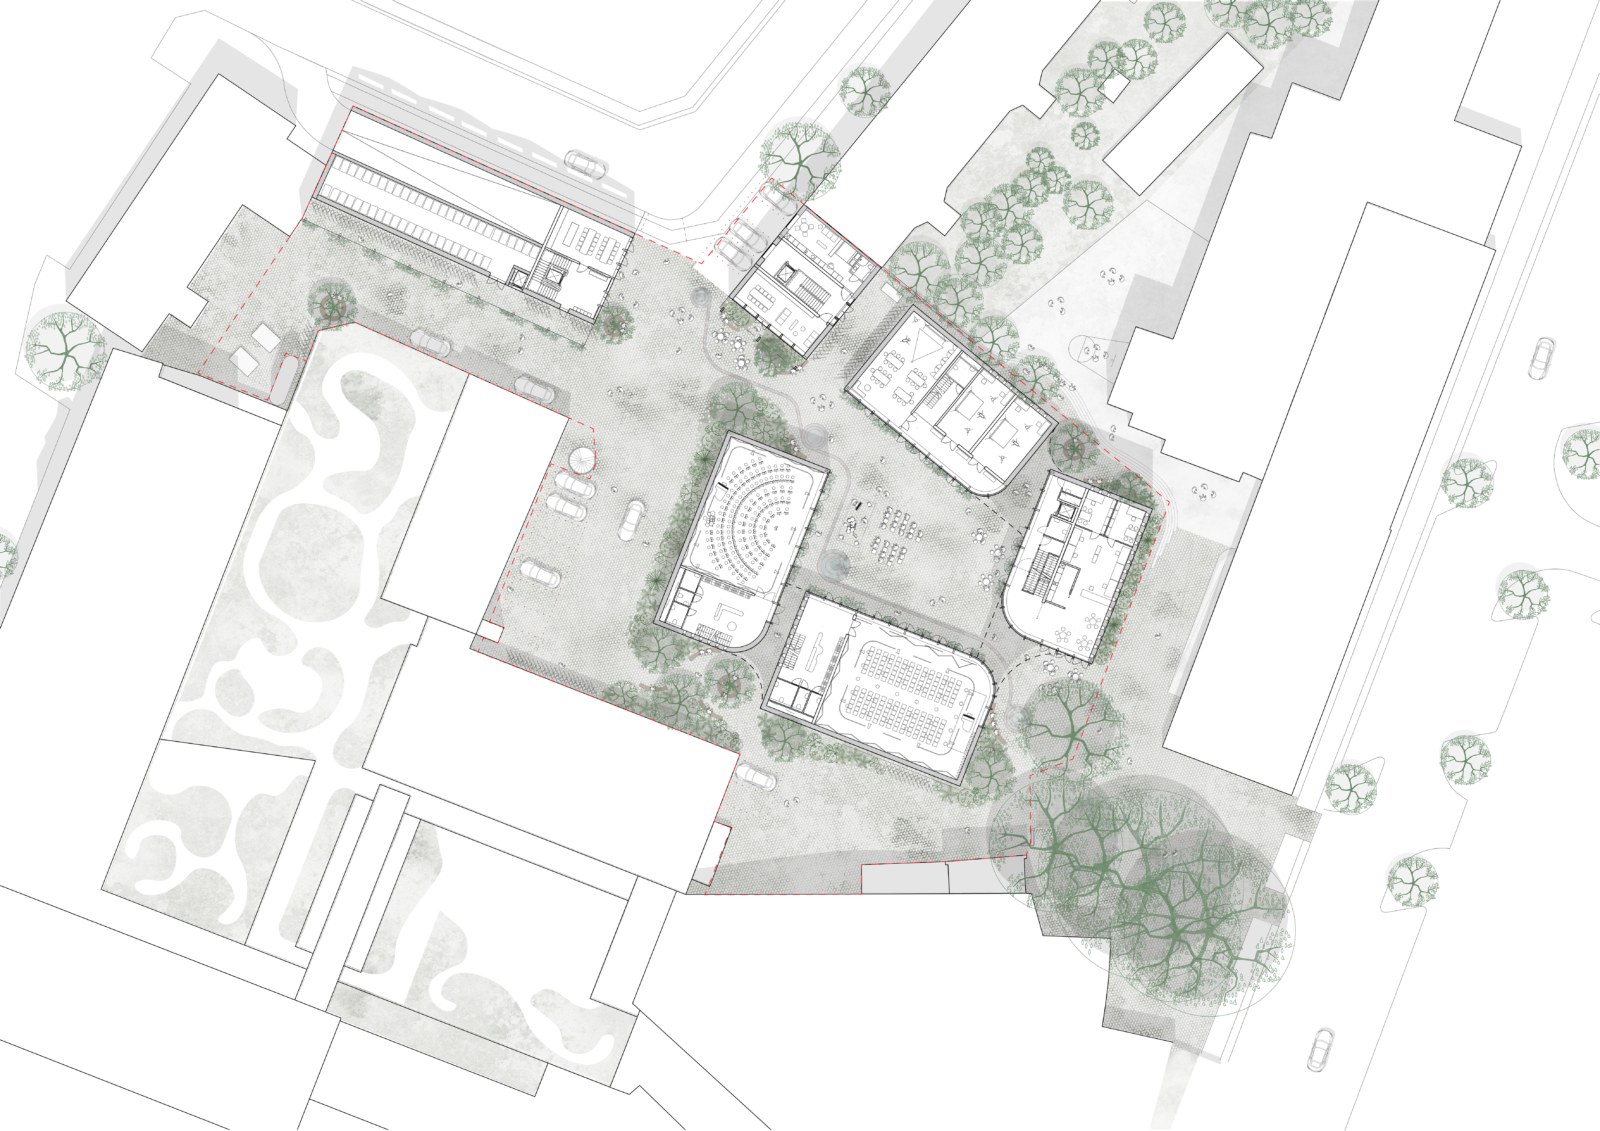 12 cobe school of music and culture plan